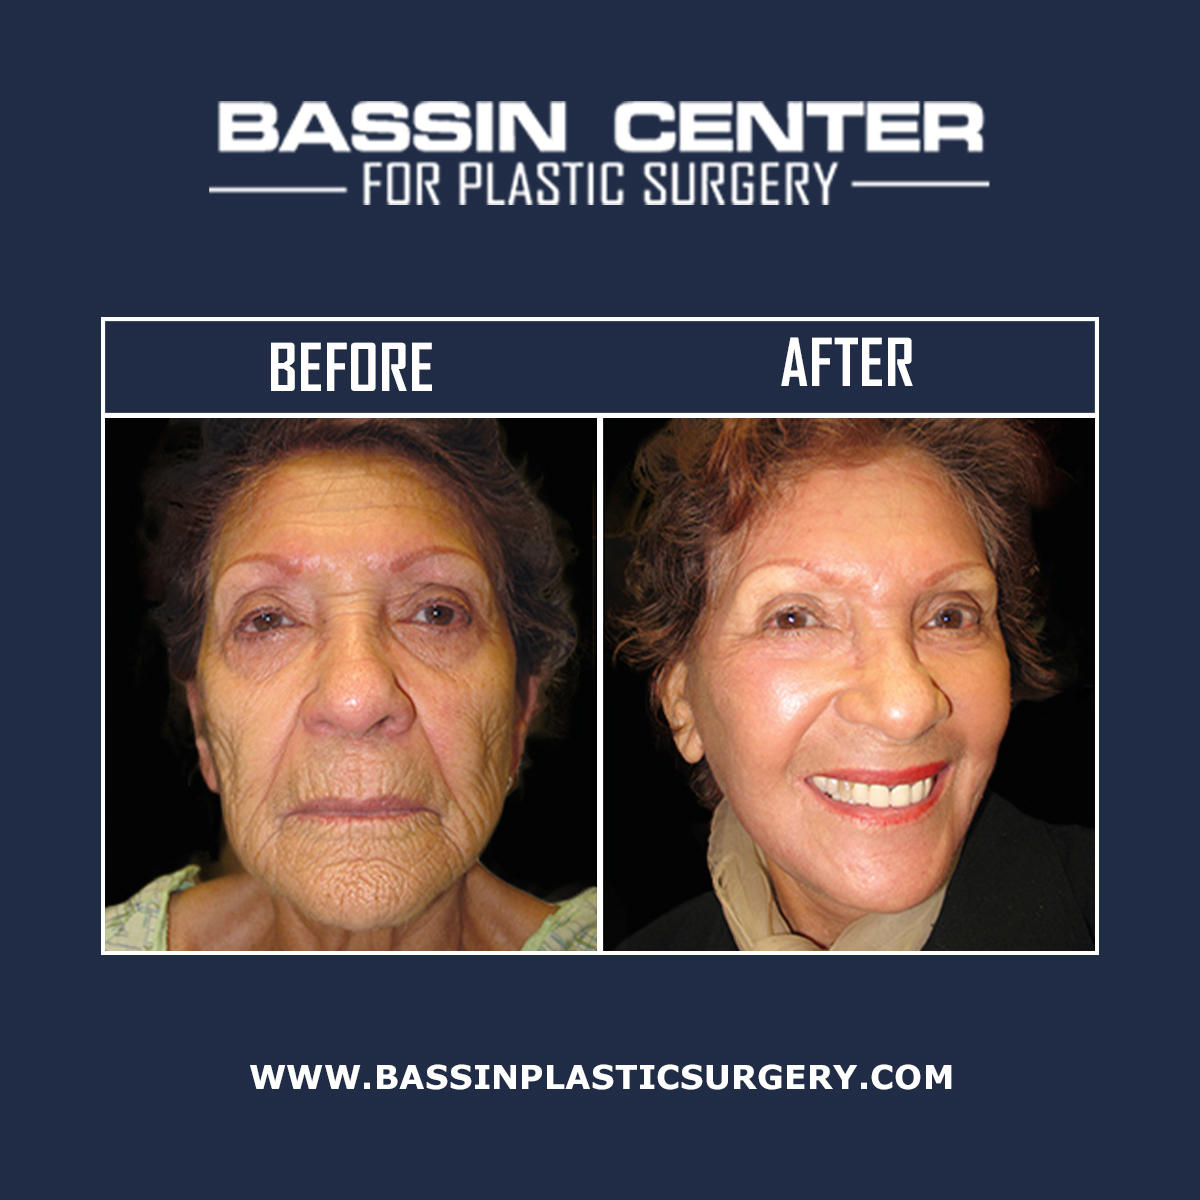 The Bassin Center for Plastic Surgery in Tampa helps patients defy the effects of aging by providing patients personalized facelift procedures to achieve long-lasting, lifted results. Facelift options include minimally-invasive laser options, non-surgical, and surgical facial rejuvenation.